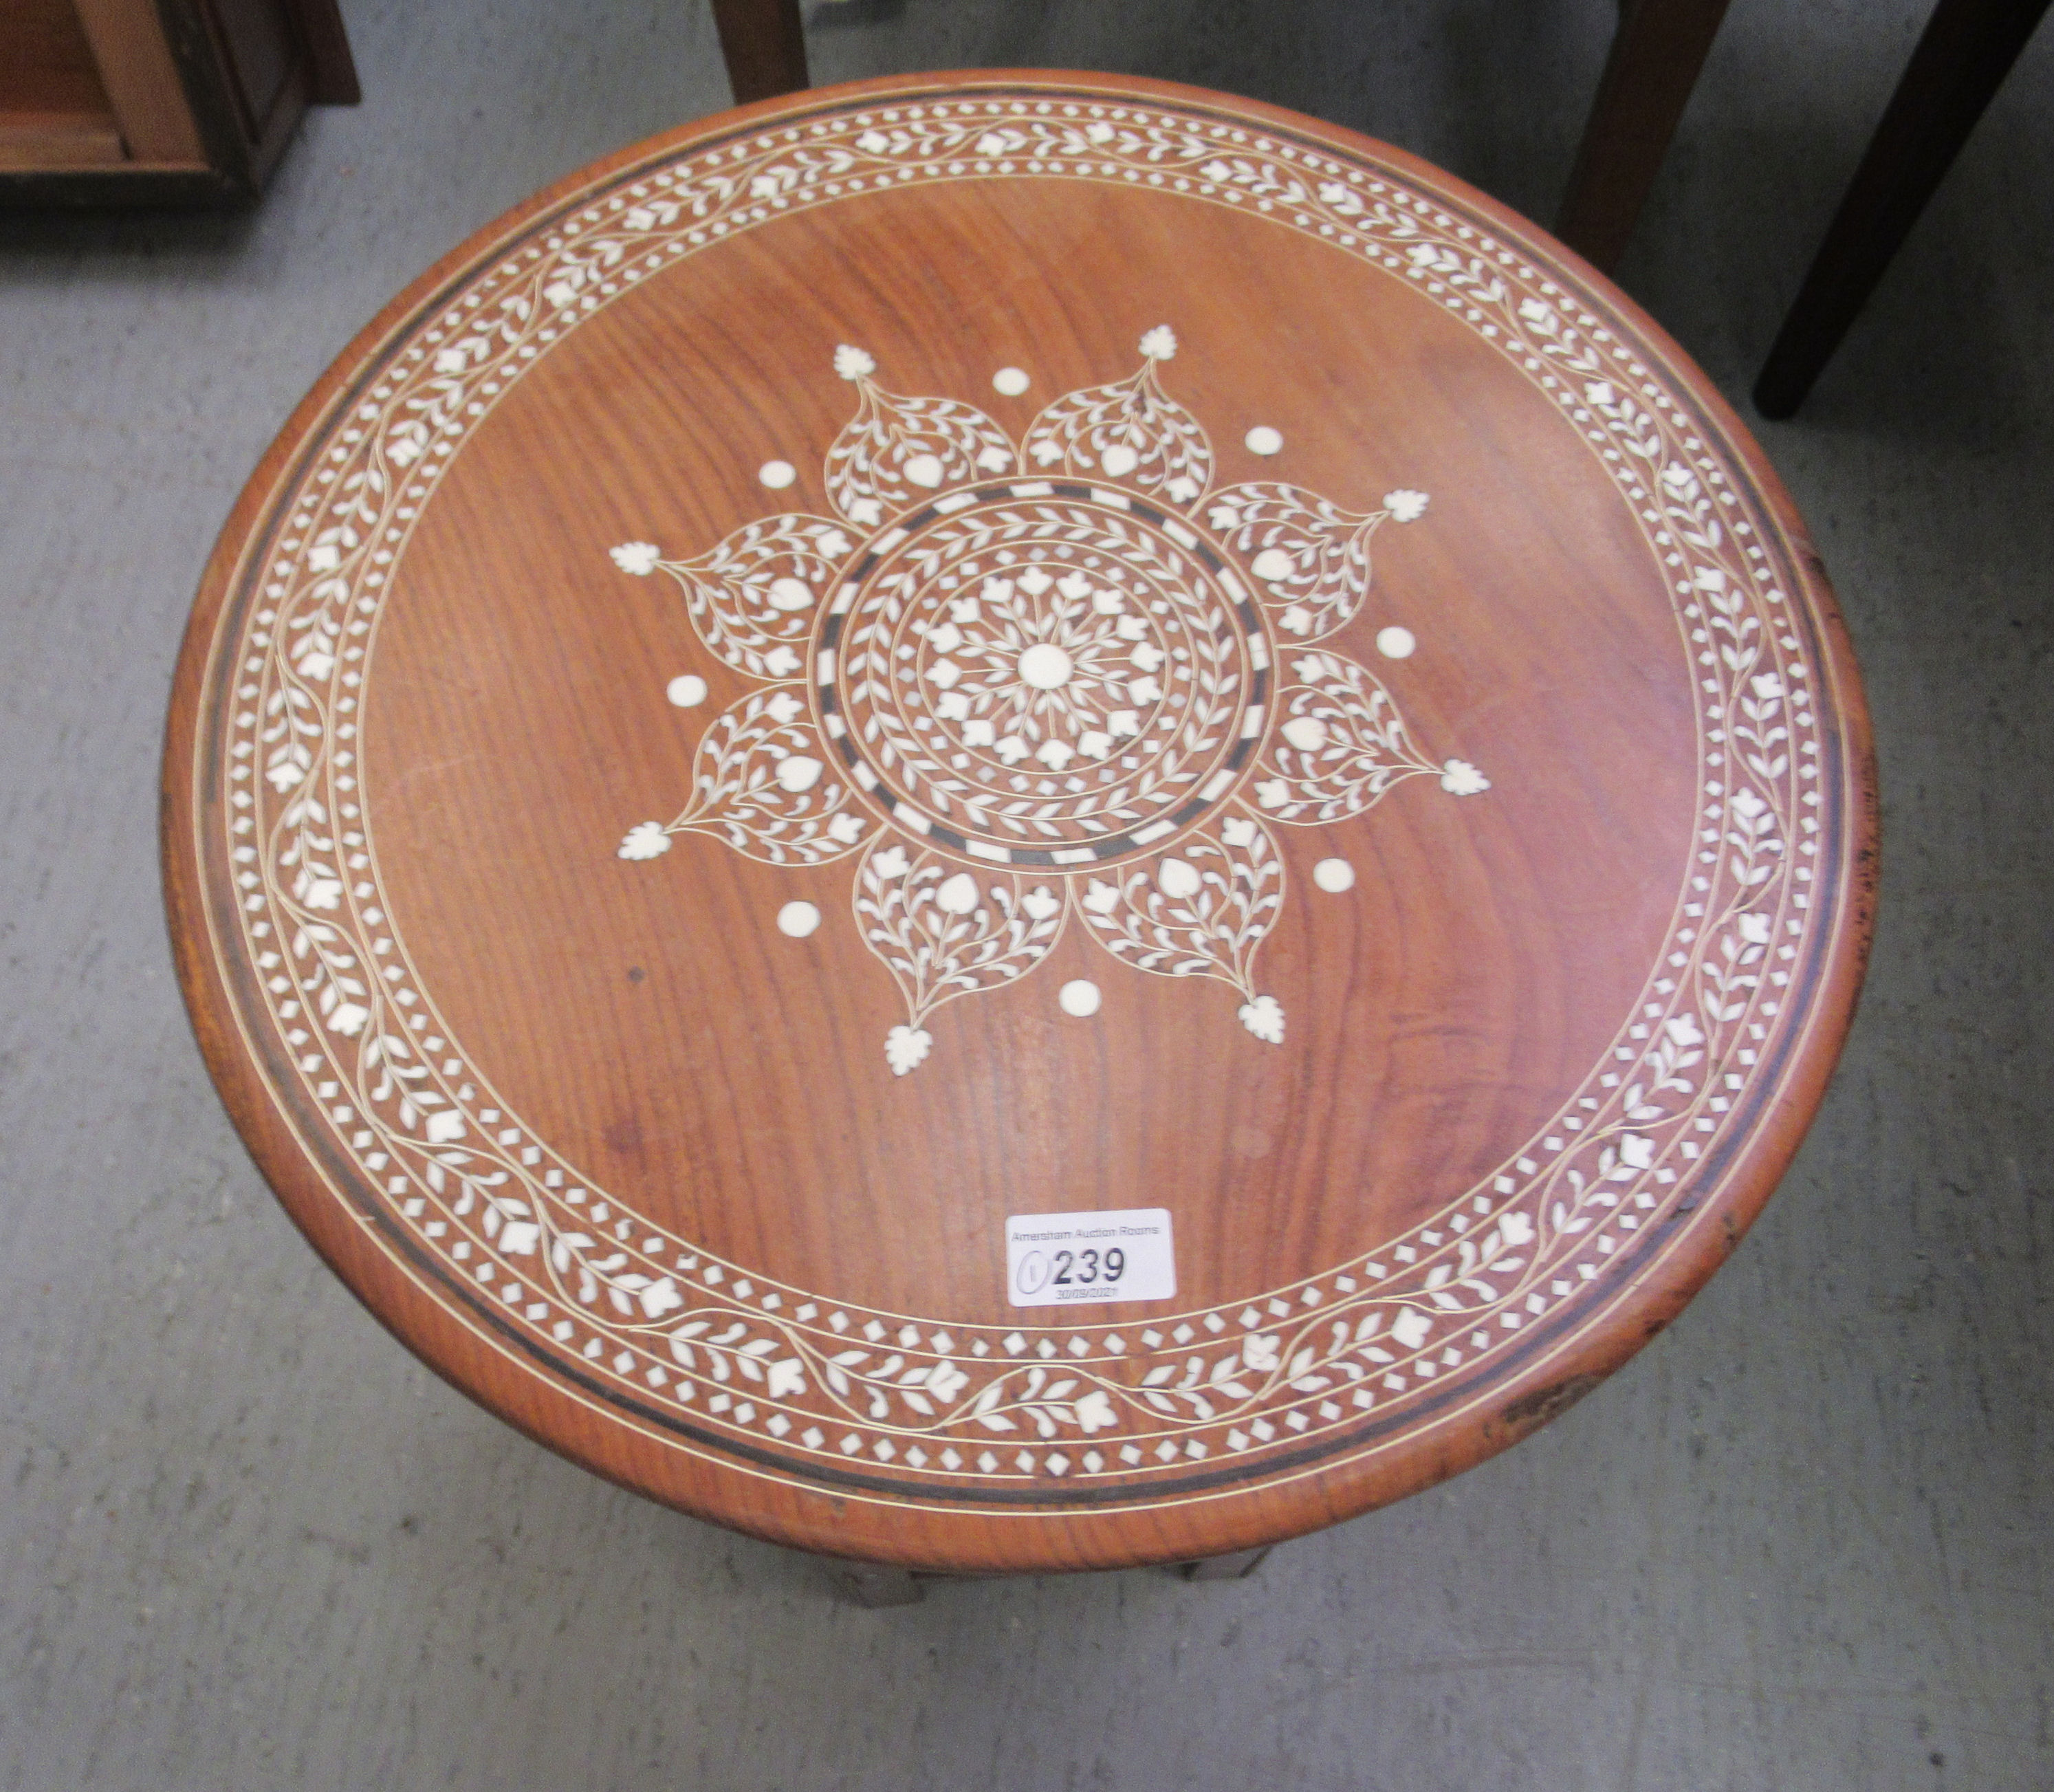 A 20thC Indian bone inlaid fruitwood occasional table, decorated with floral designs  18"h  18"dia - Image 2 of 4